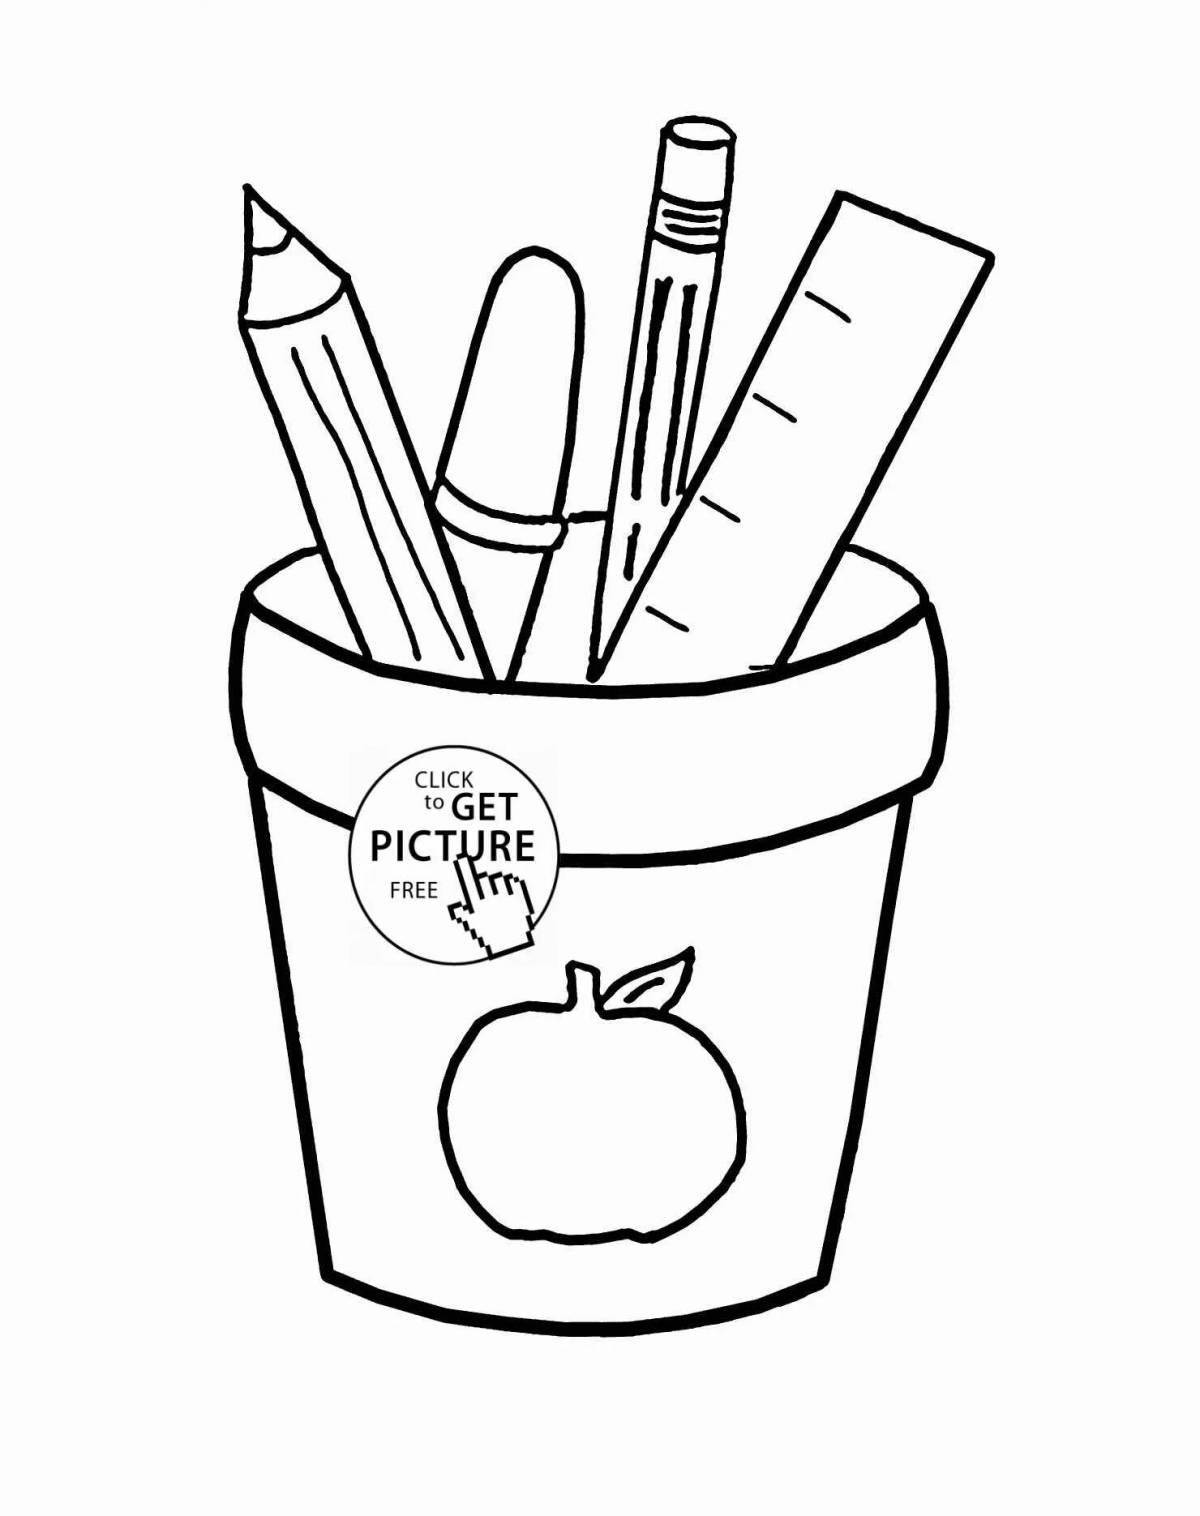 Coloring page of stationery for girls